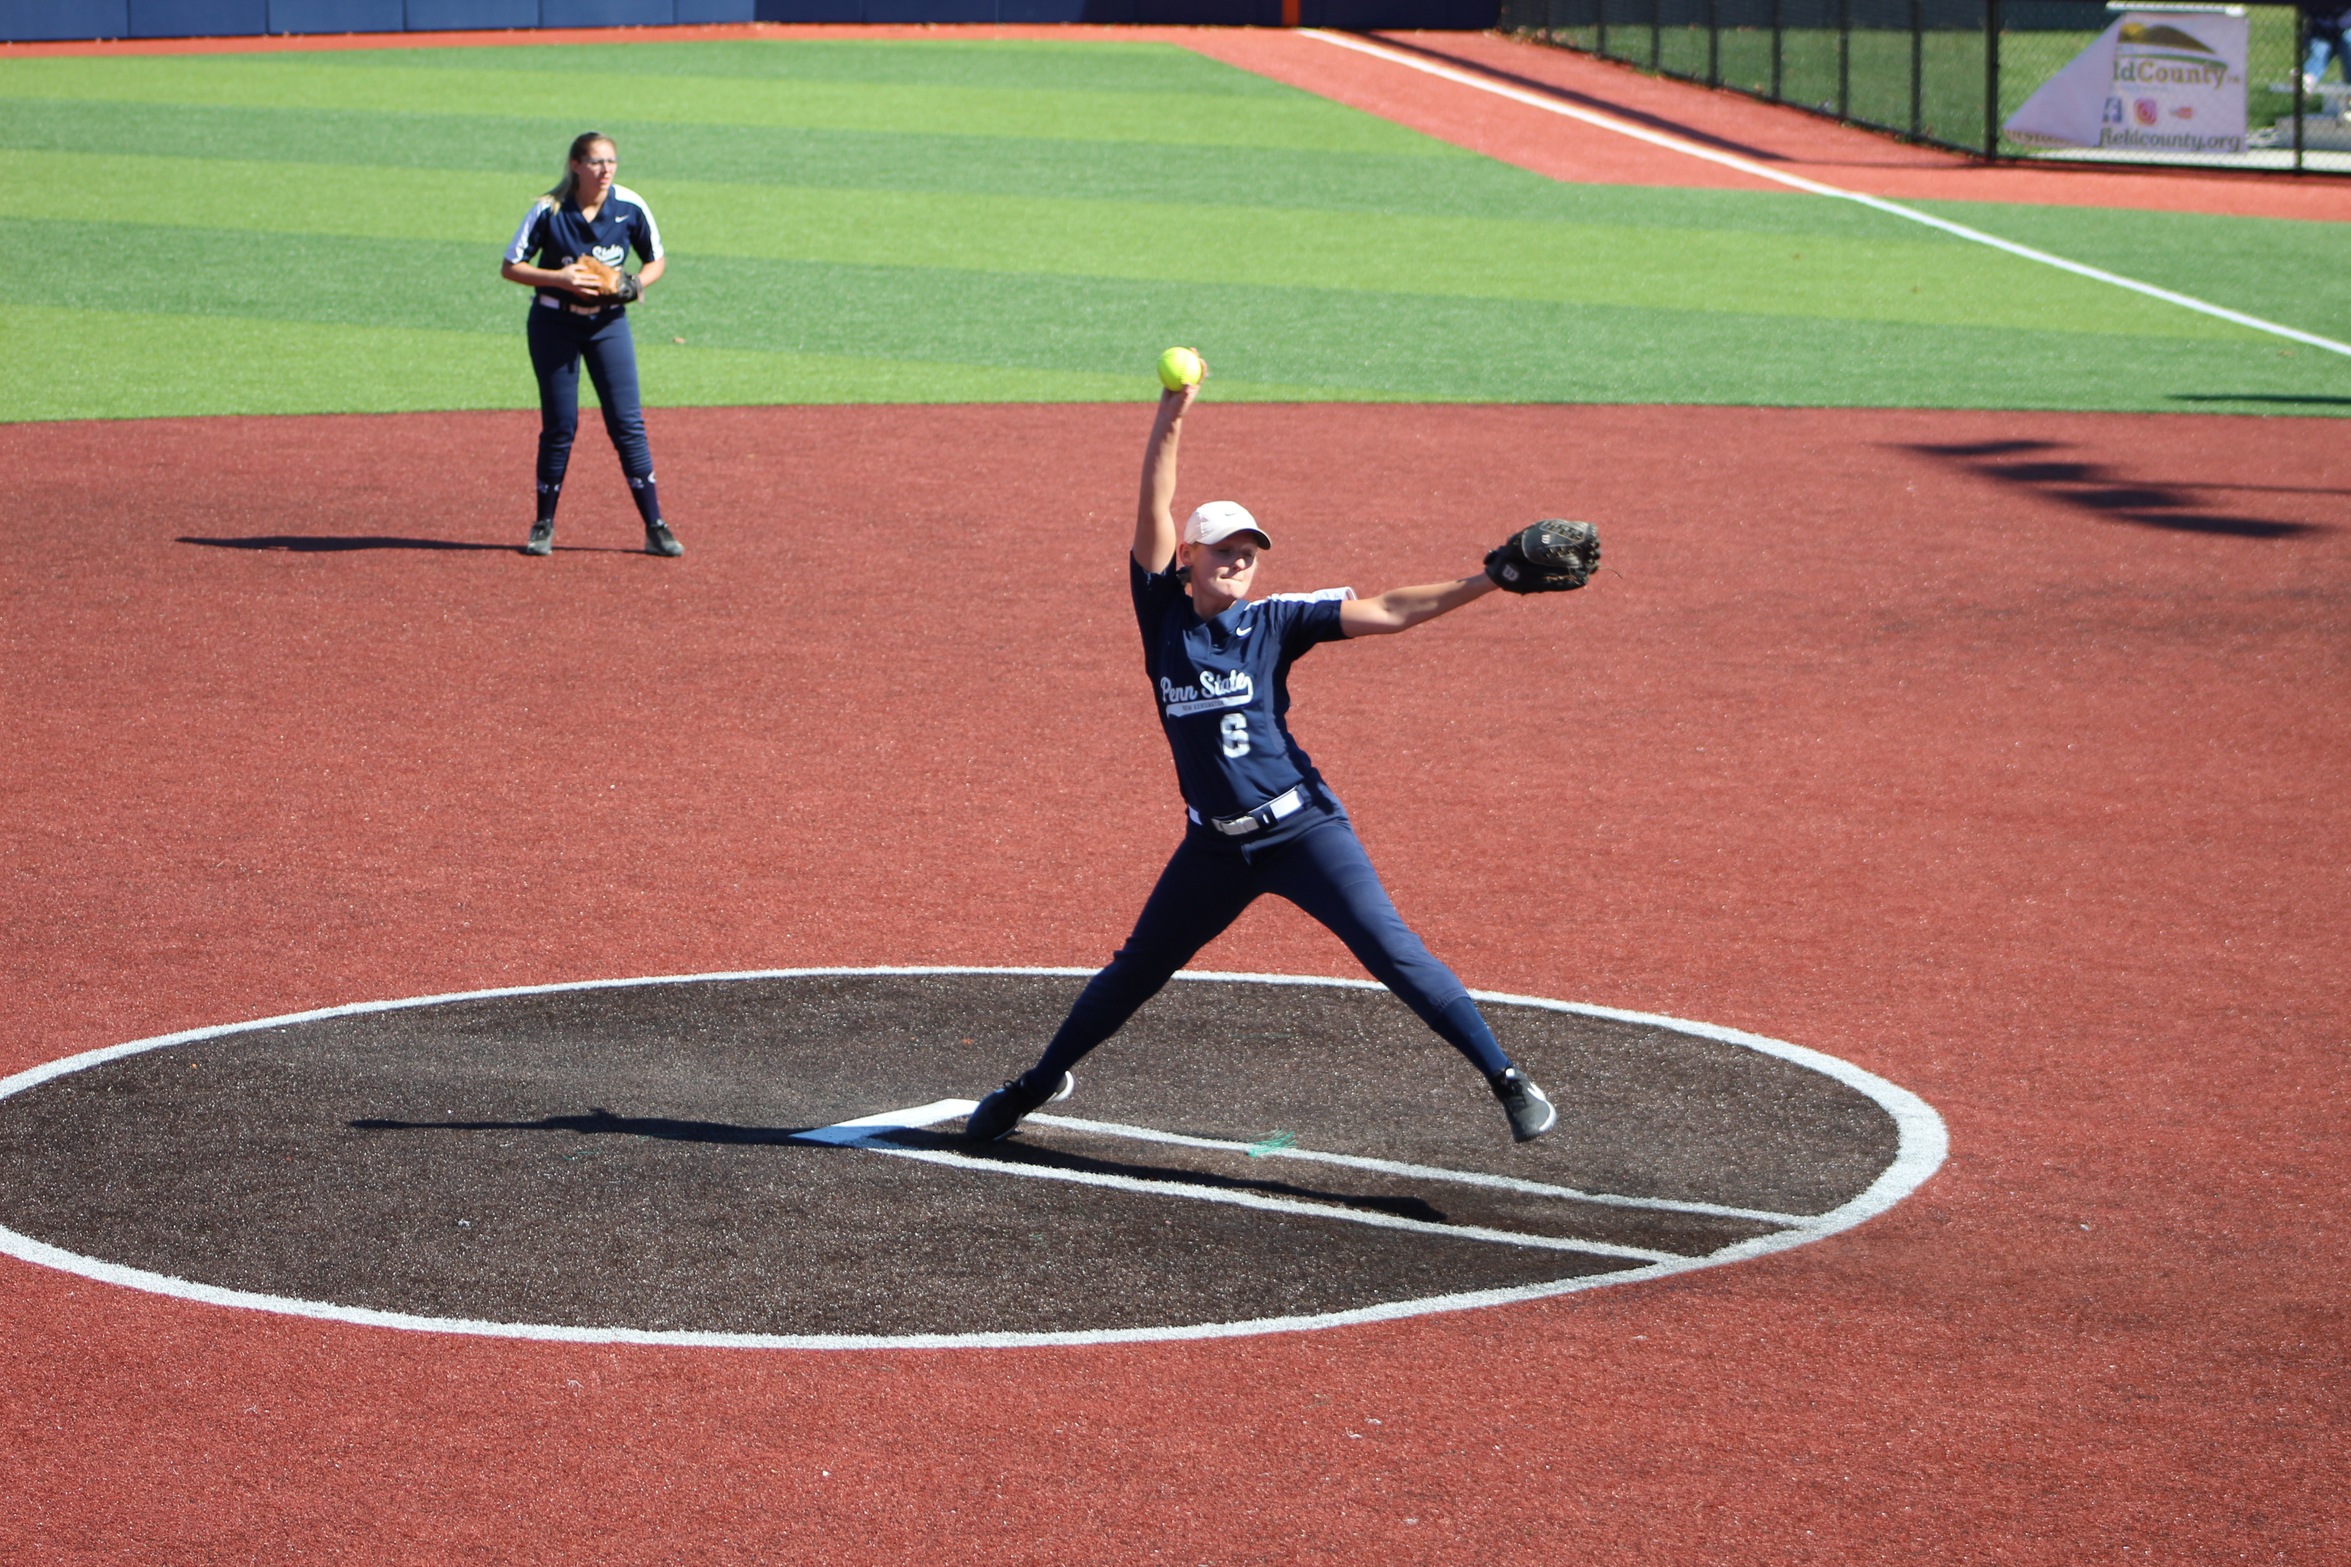 Calle Zmenkowski winds up to pitch for Penn State New Kensington.